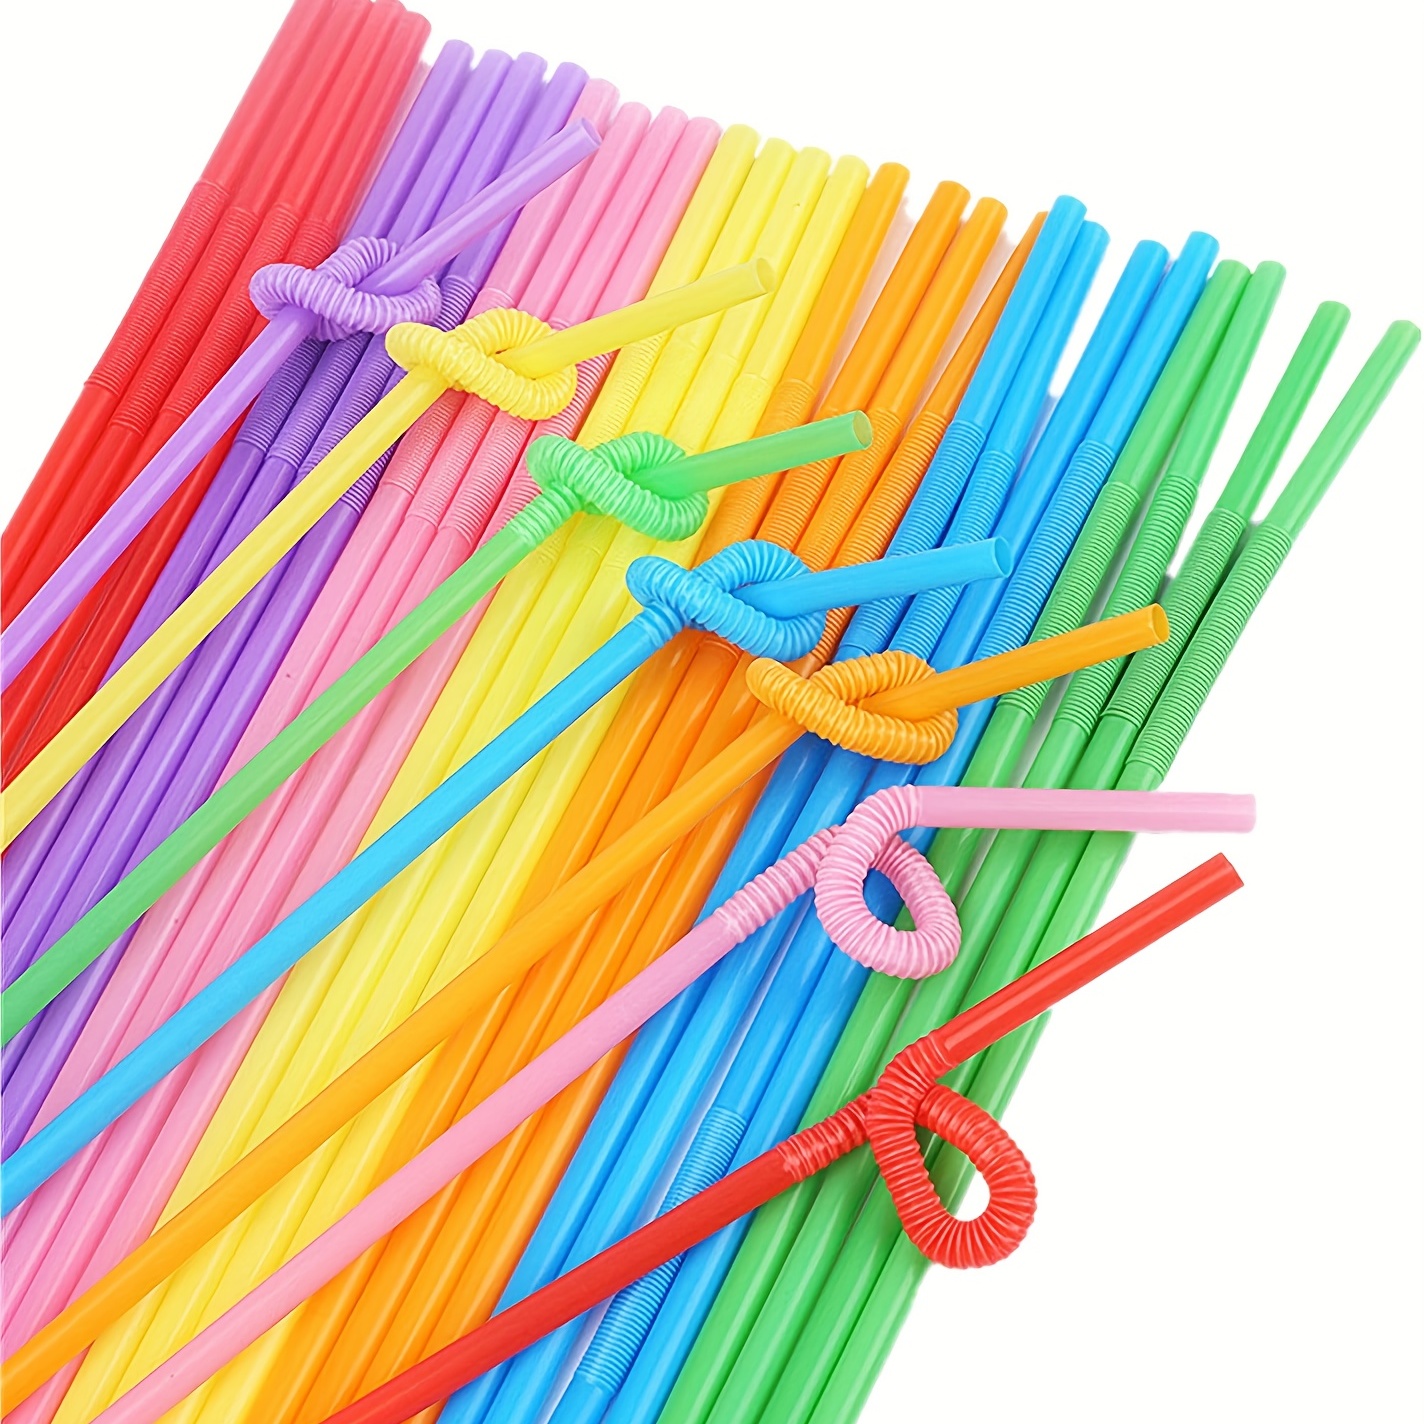 200 Pack Plastic Extra Long Straws for Birthday Party, 13 inch Disposable Drinking Straws for Cocktails, Coffee (4 Rainbow Colors)